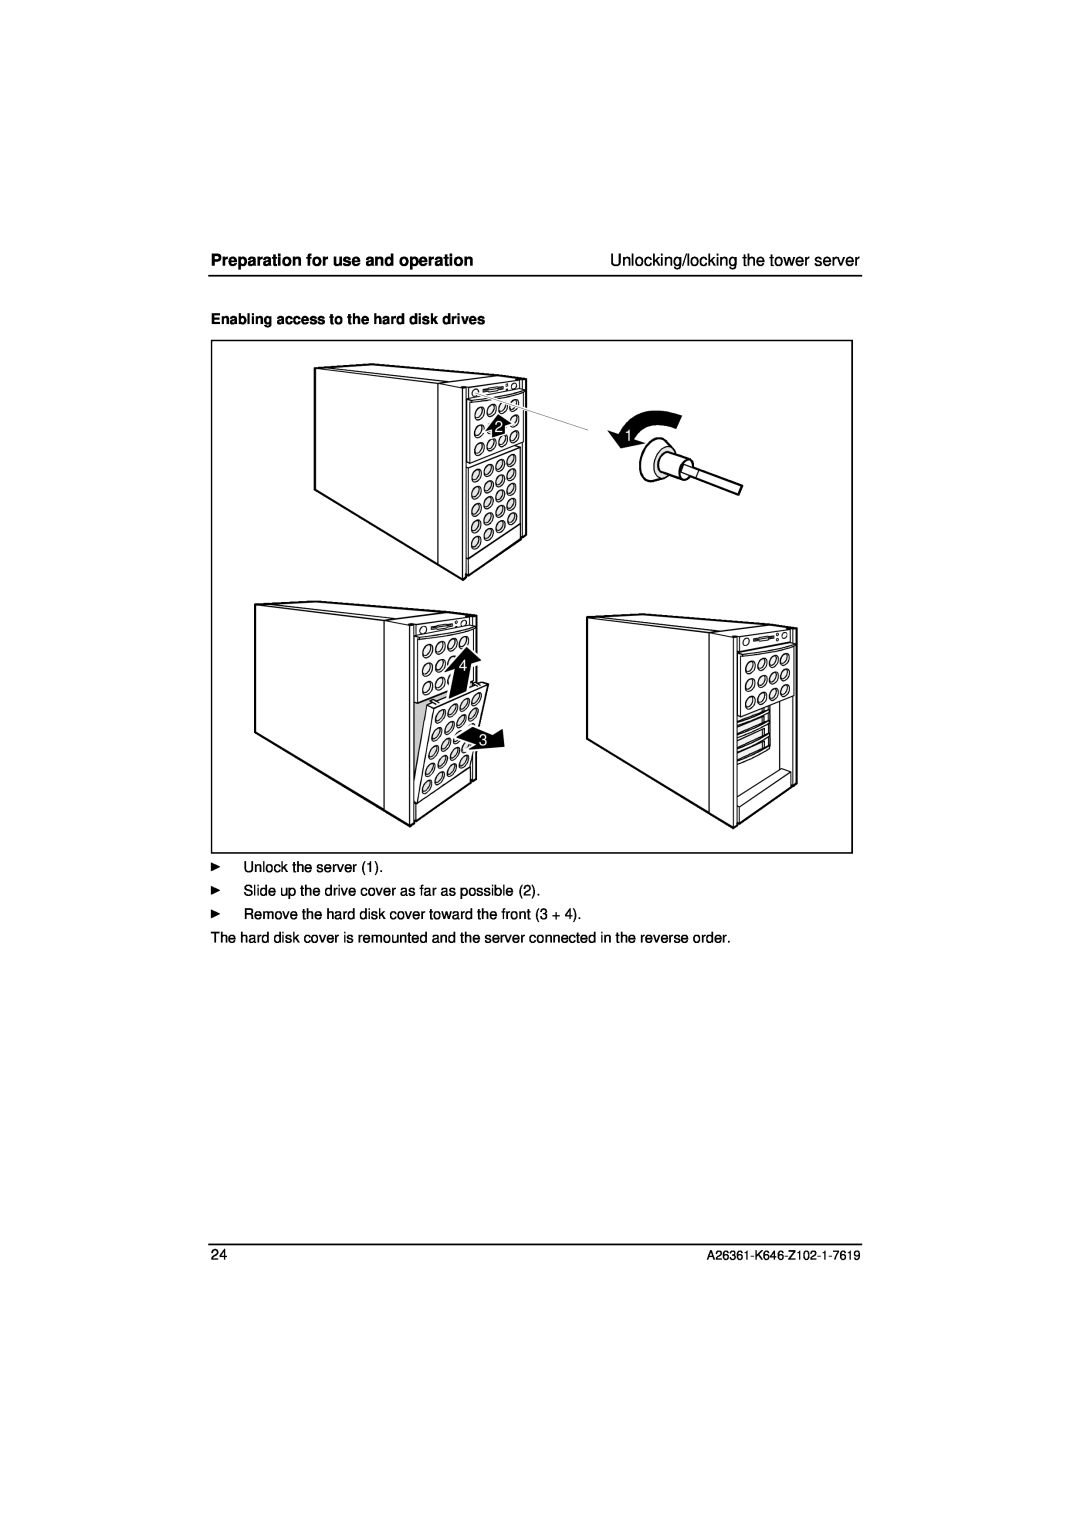 Fujitsu B120 manual Preparation for use and operation, Enabling access to the hard disk drives, A26361-K646-Z102-1-7619 